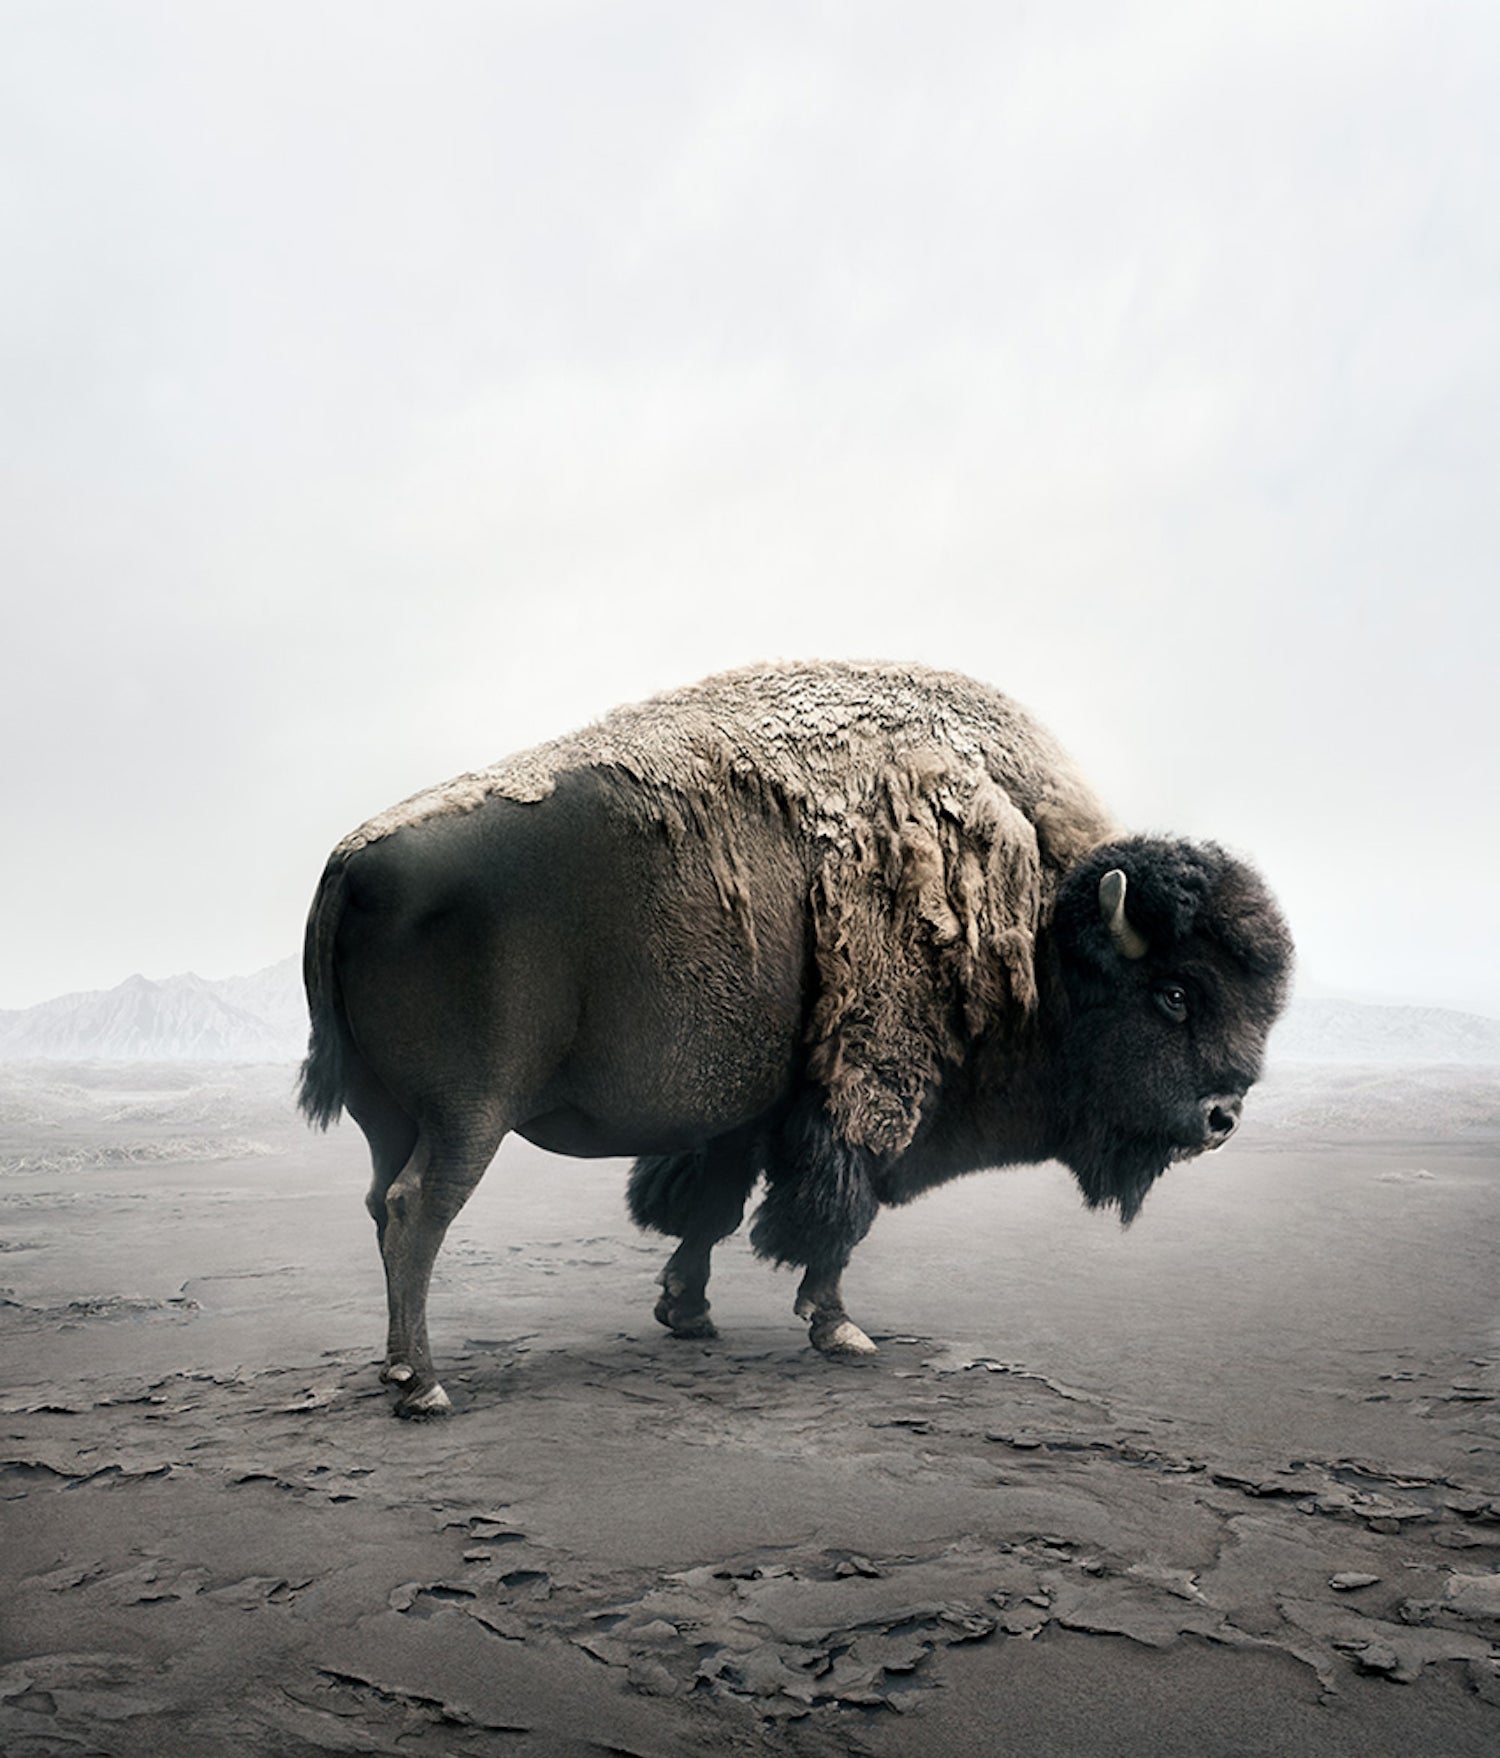  “Be Here Bison” by Alice Zilberberg, from her series, “Meditations 2019-2021.” For this series, Zilberberg produced digital montages in post-production of animals that she says are “an expression of self-therapy.” For the artist, her depictions of these creatures reinstate a tranquility and a sense of calm in a tumultuous urban world.